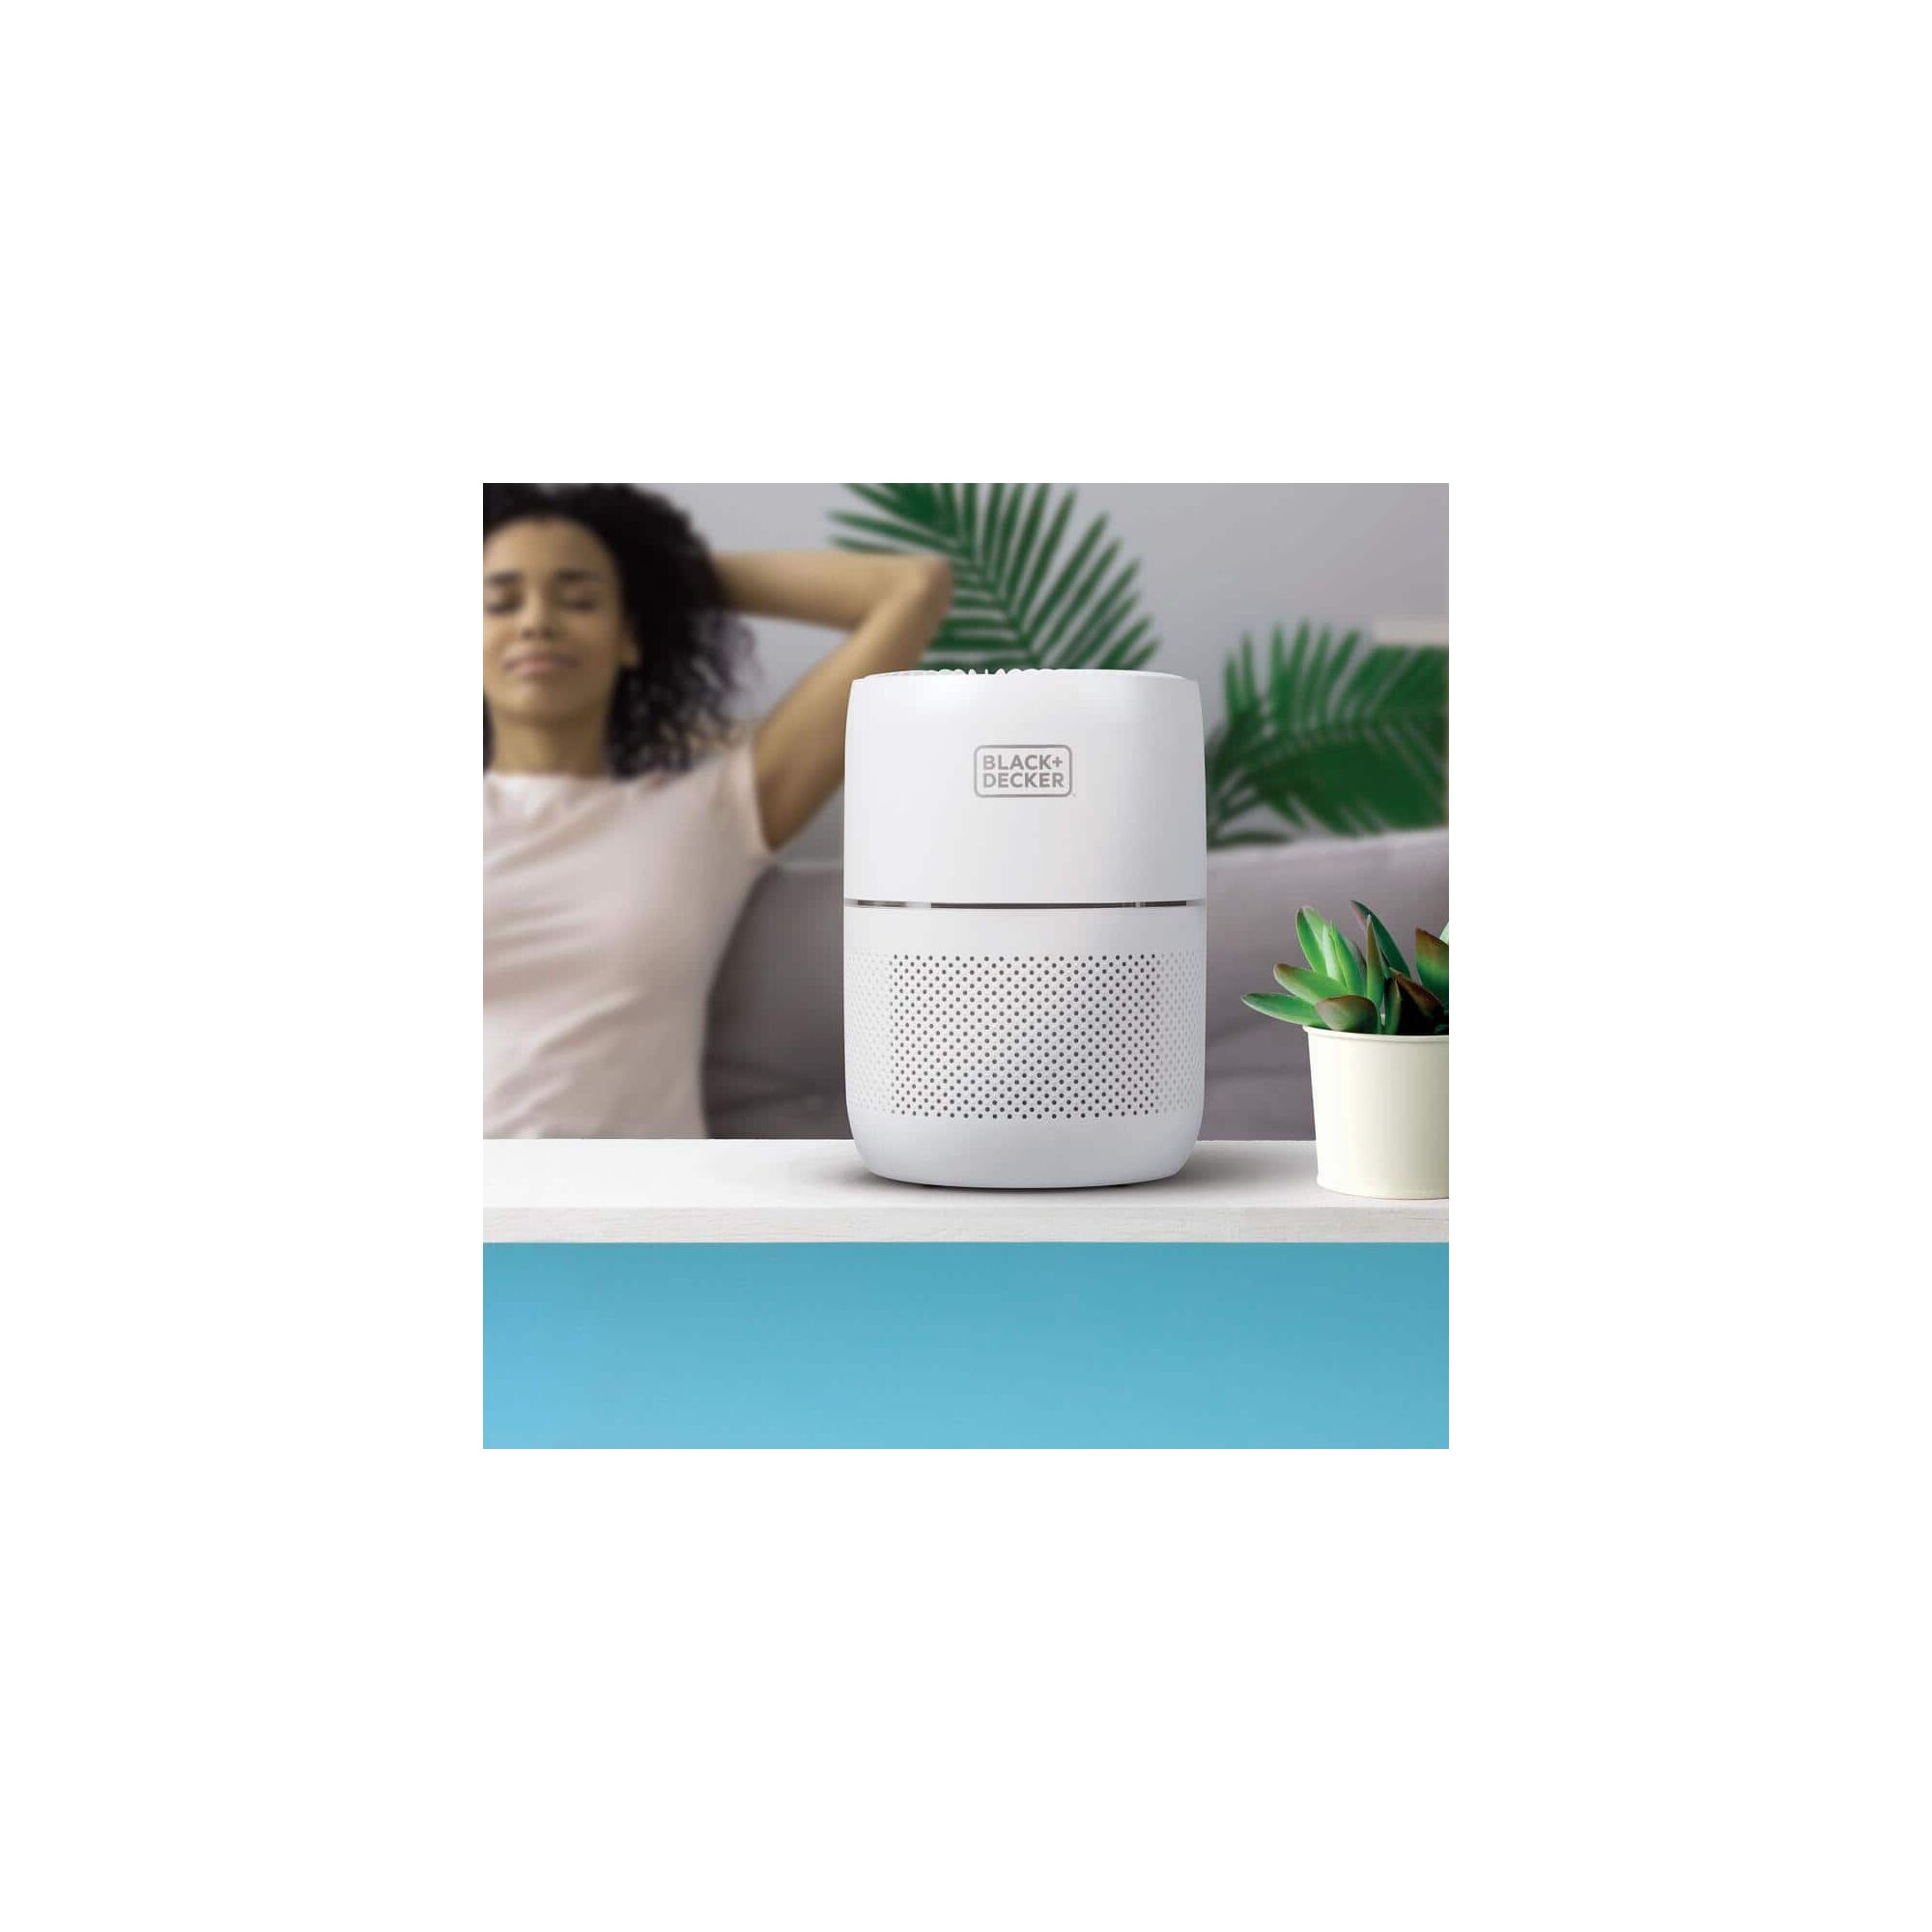 BLACK+DECKER Hepa Tabletop Air Purifier on a counter near a woman relaxing in the background